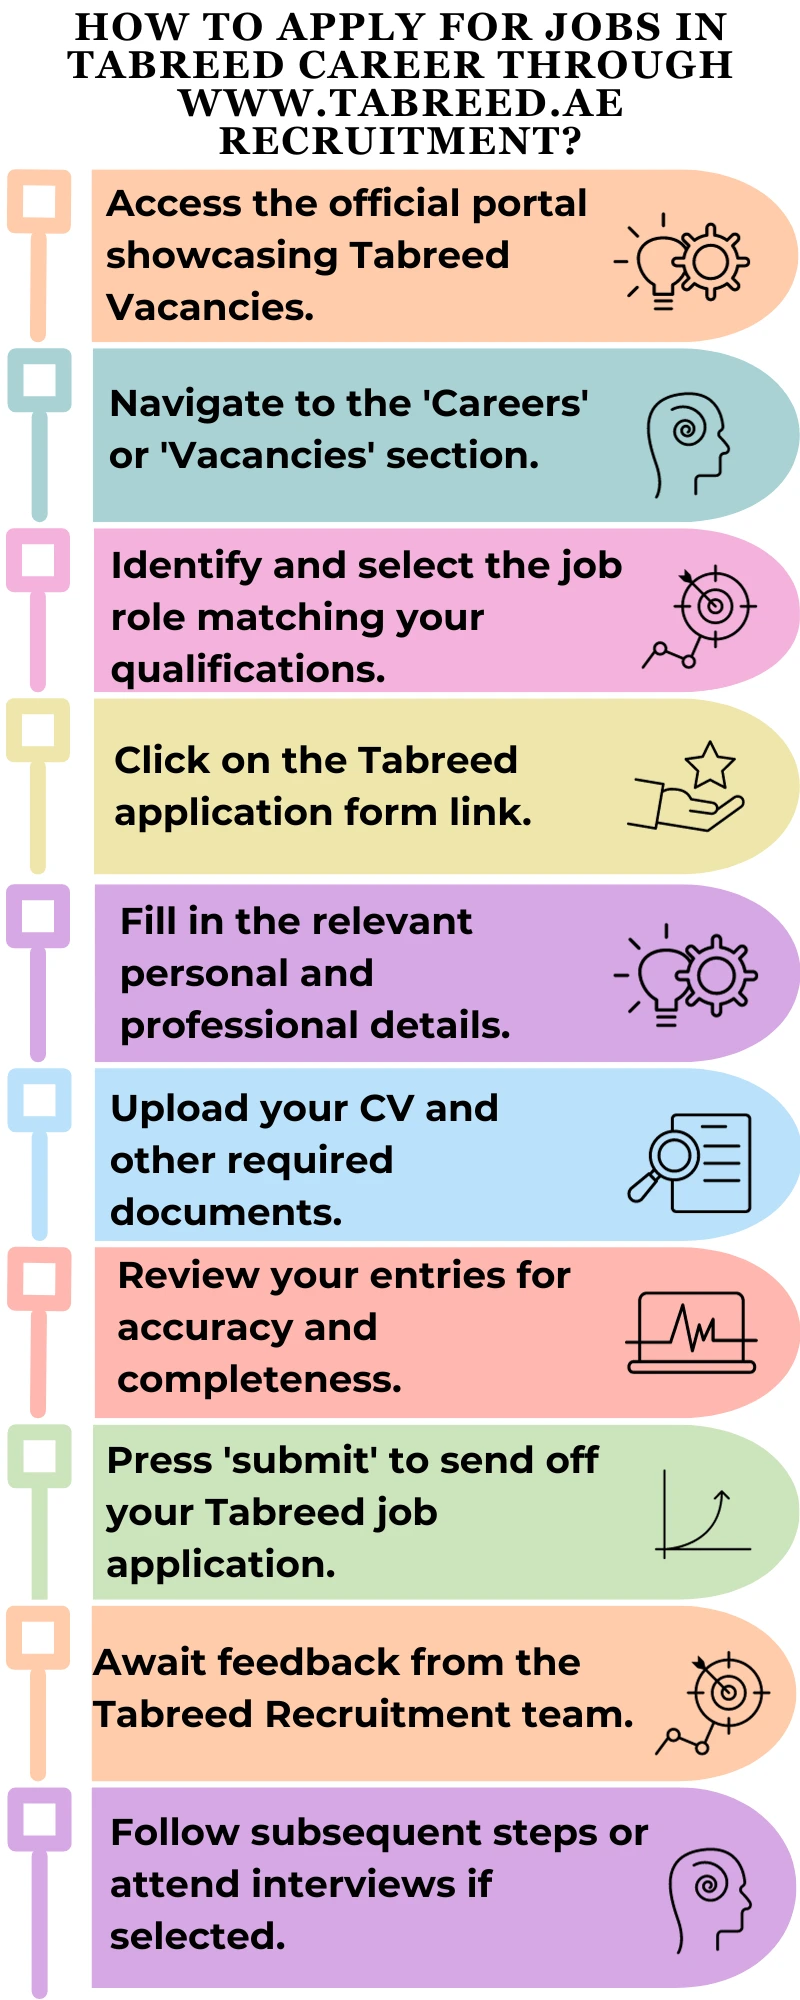 How to Apply for Jobs in Tabreed Career through www.tabreed.ae recruitment?